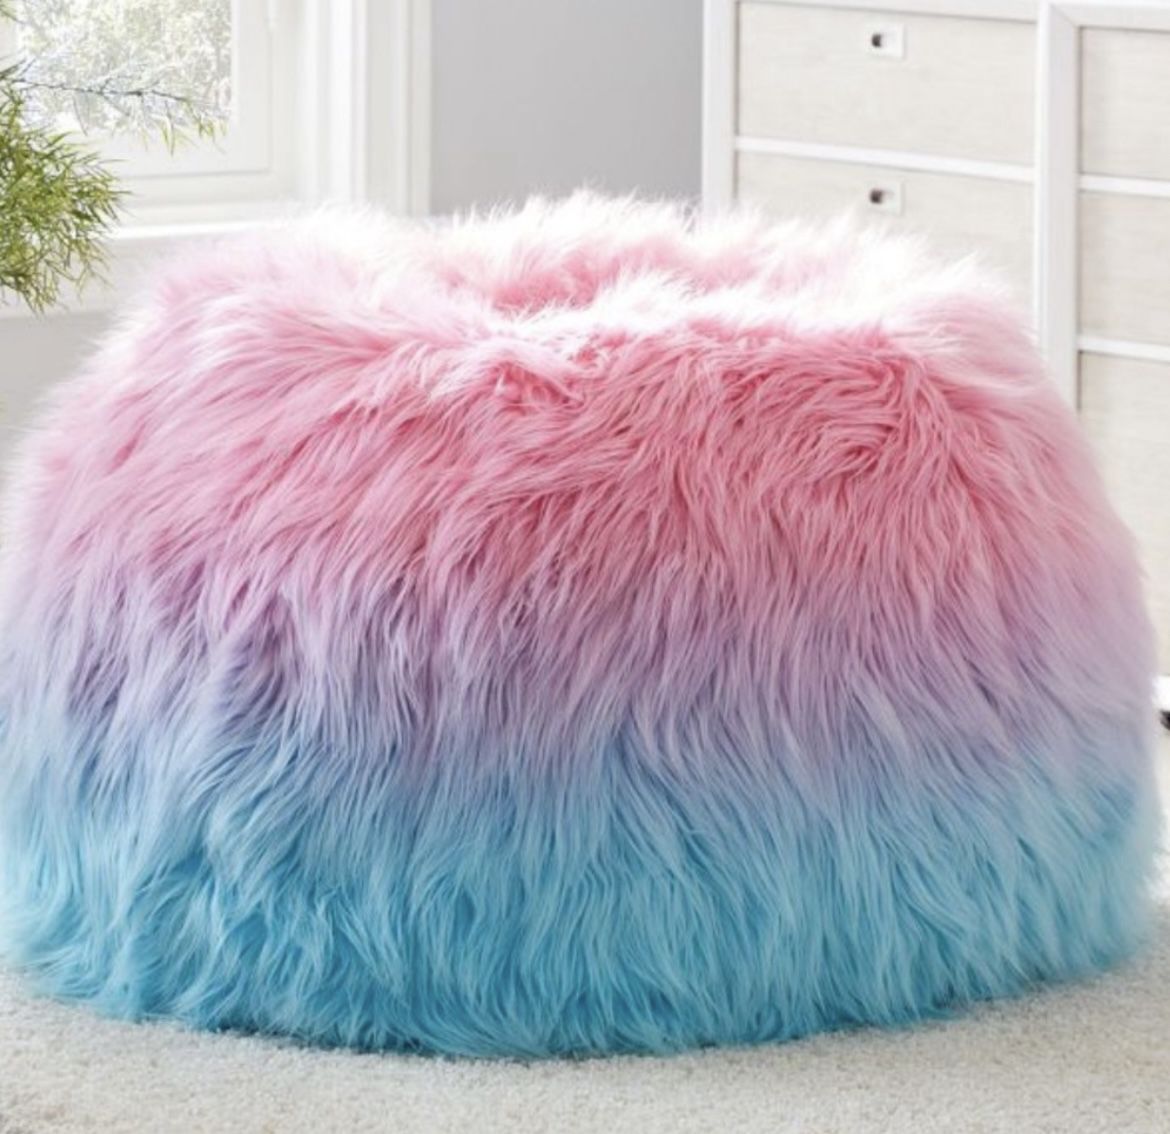 Pottery Barn Teen Faux Fur Snowcone Bean Bag With Cover 